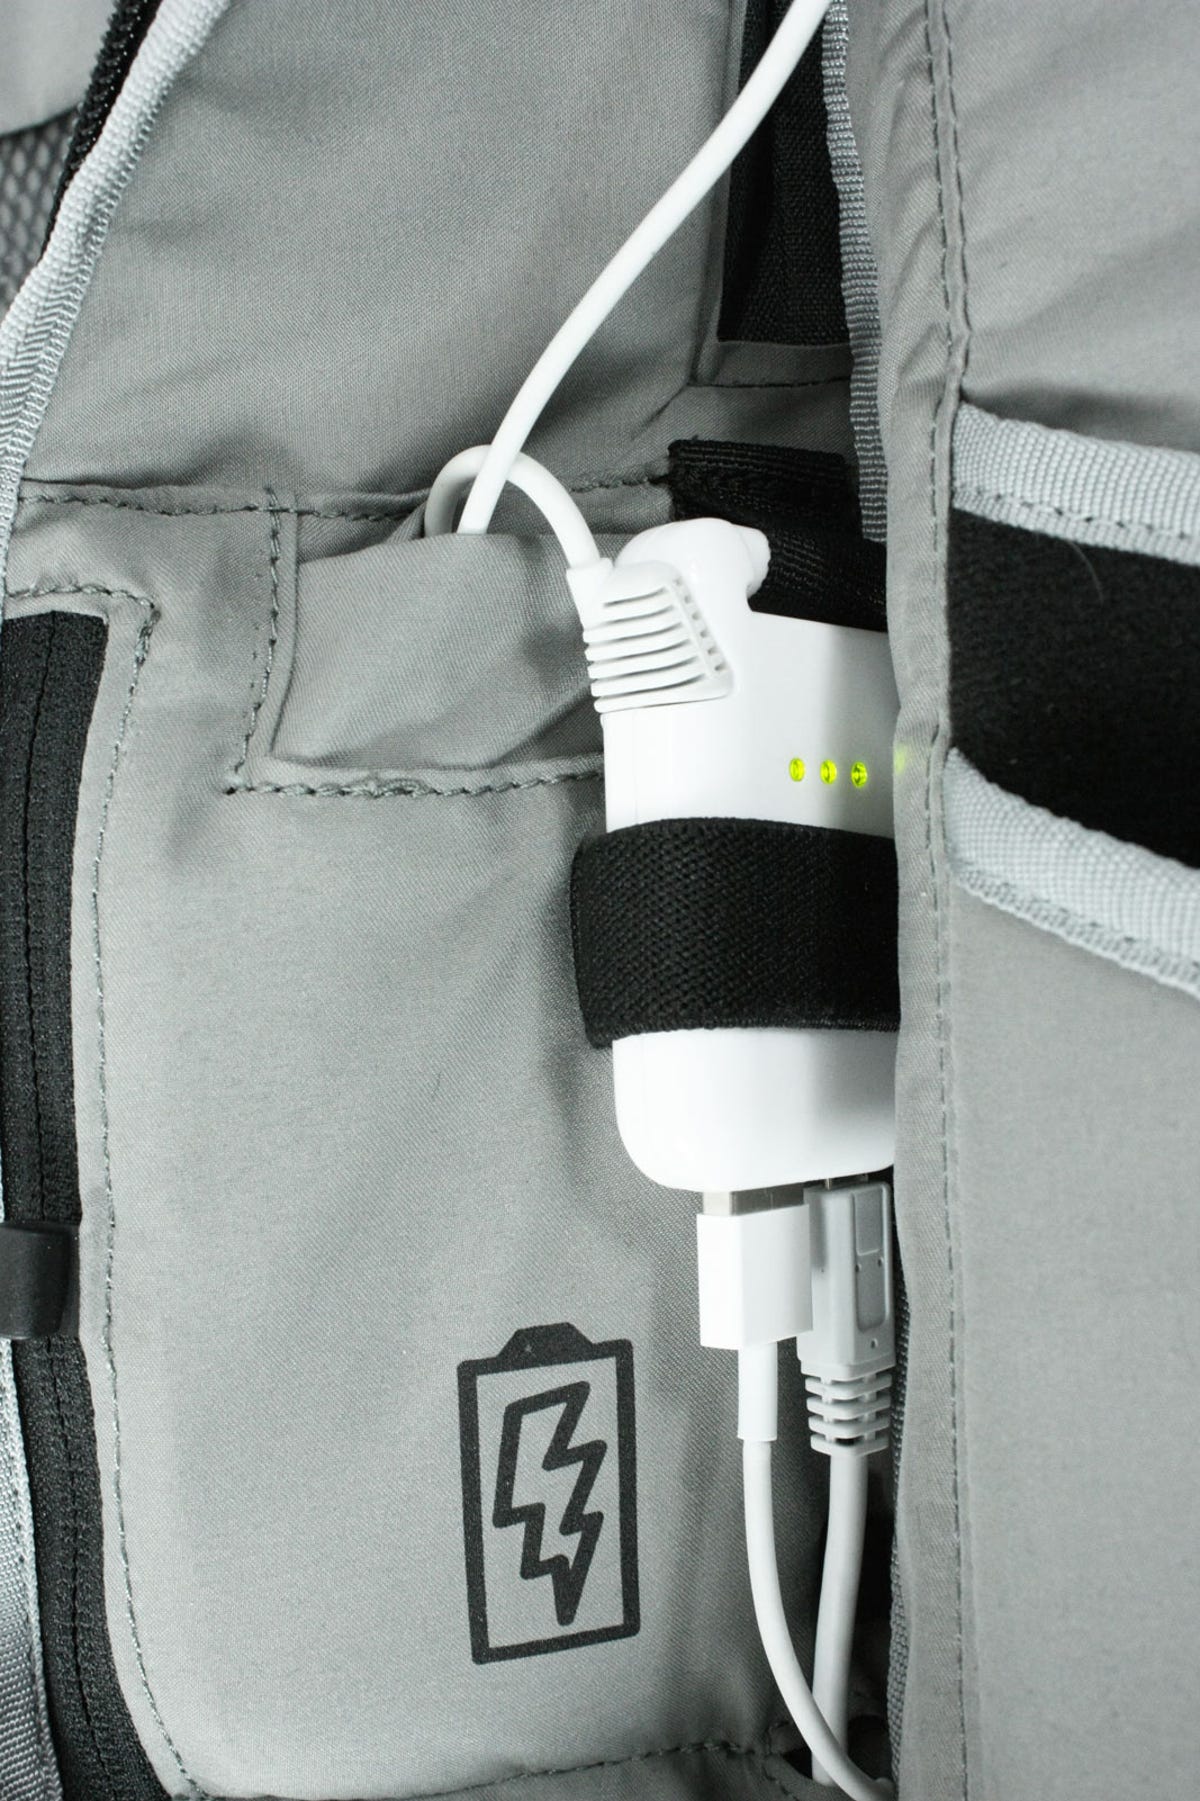 Inside the Colfax backpacks is a lithium polymer battery with enough charge to top up a cell phone twice.